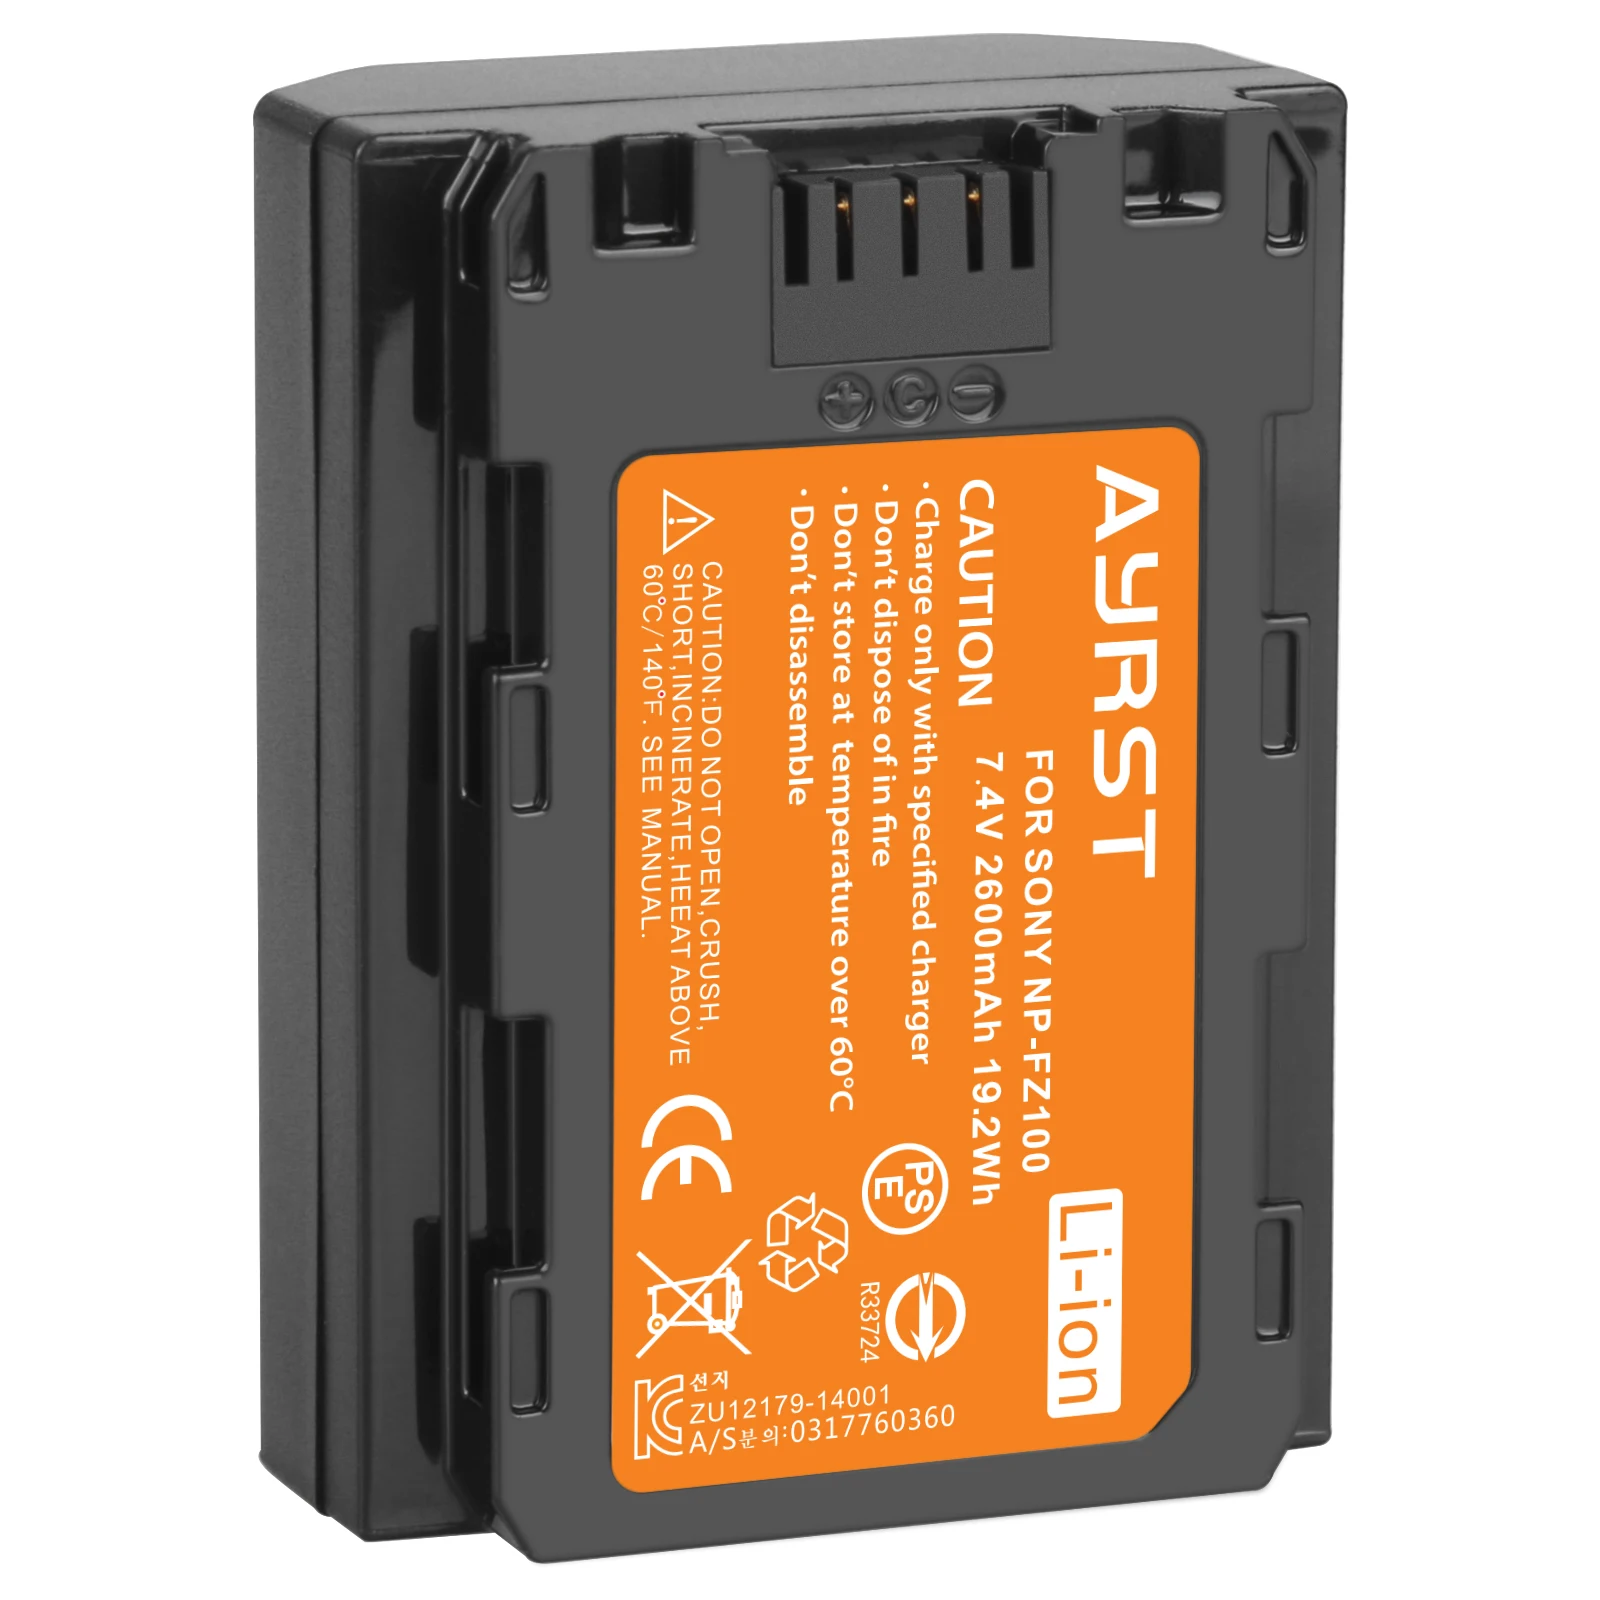 

1pc NP-FZ100 NPFZ100 Battery Pack for Sony A9 II / A7R IV / A7R III / A7 III / ILCE-9 ILCE9 ILCE-7RM3 ILCE-7M3 A6600 as NP-FZ100